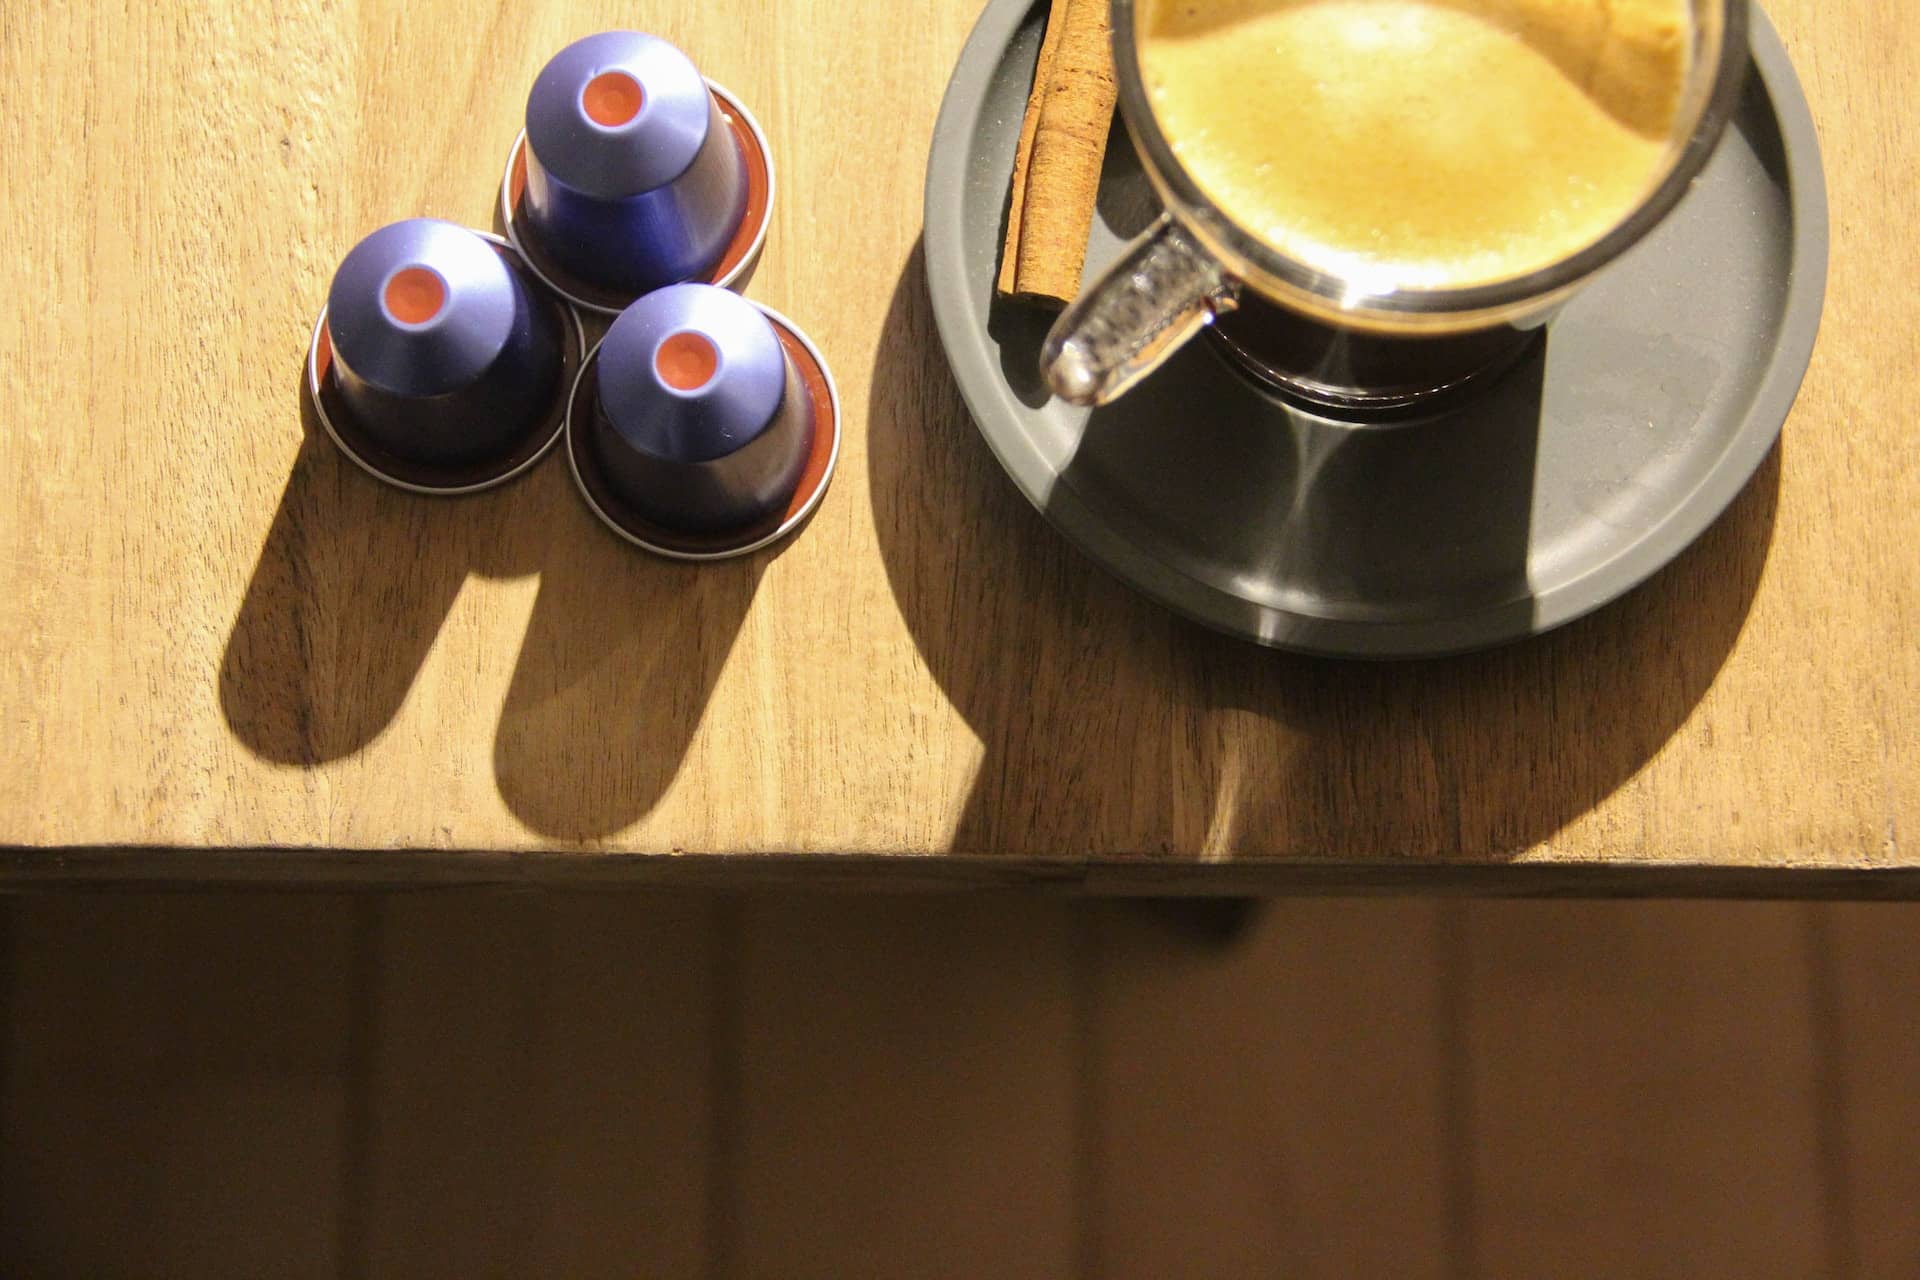 Nespresso pods next to a cup of coffee